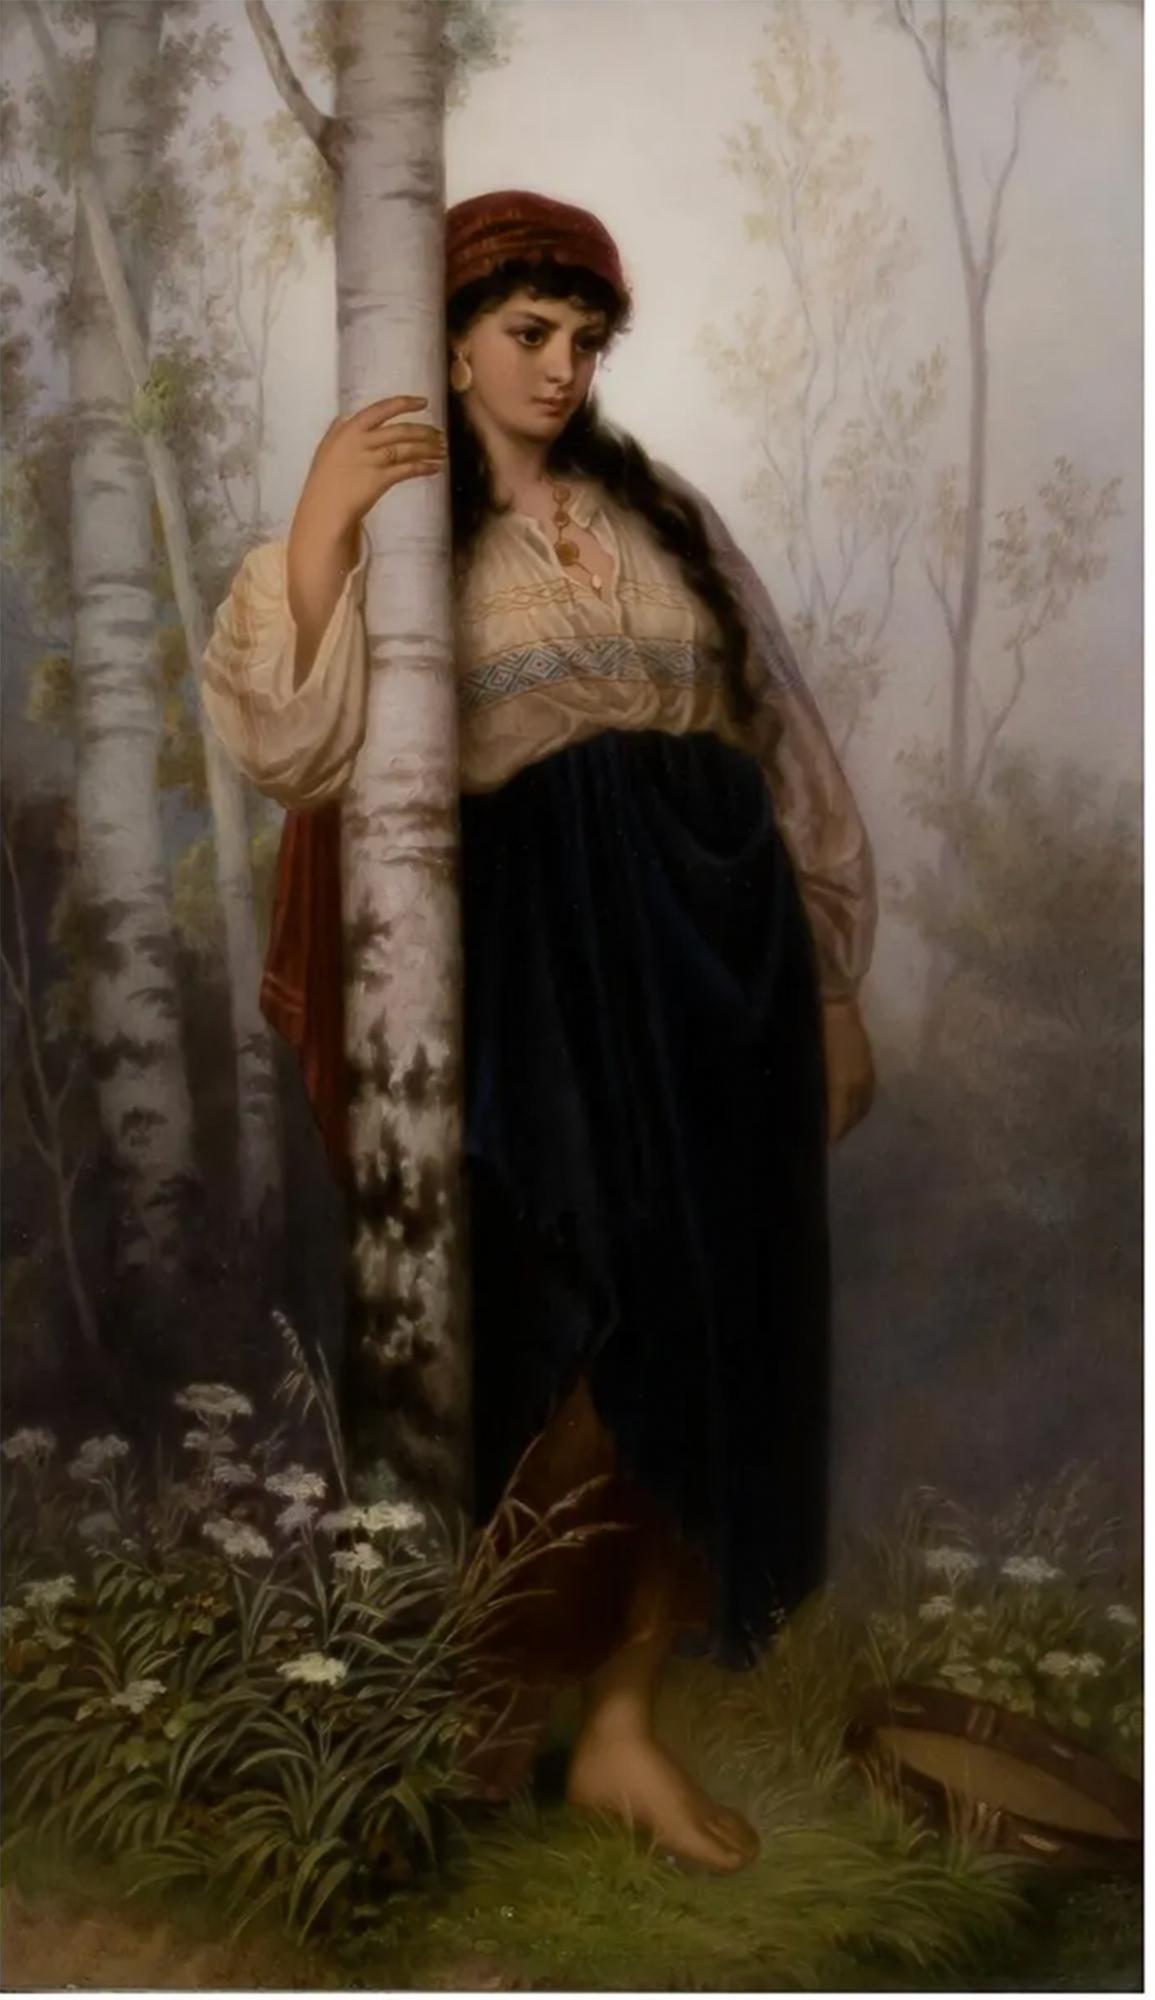 A delightful porcelain plaque of a middle eastern woman wearing a head scarf, gold medallion jewelry and an embroidered shirt with puffed sleeves. A tambourine sits on the ground before her as she leans against a birch tree, casting her powerful